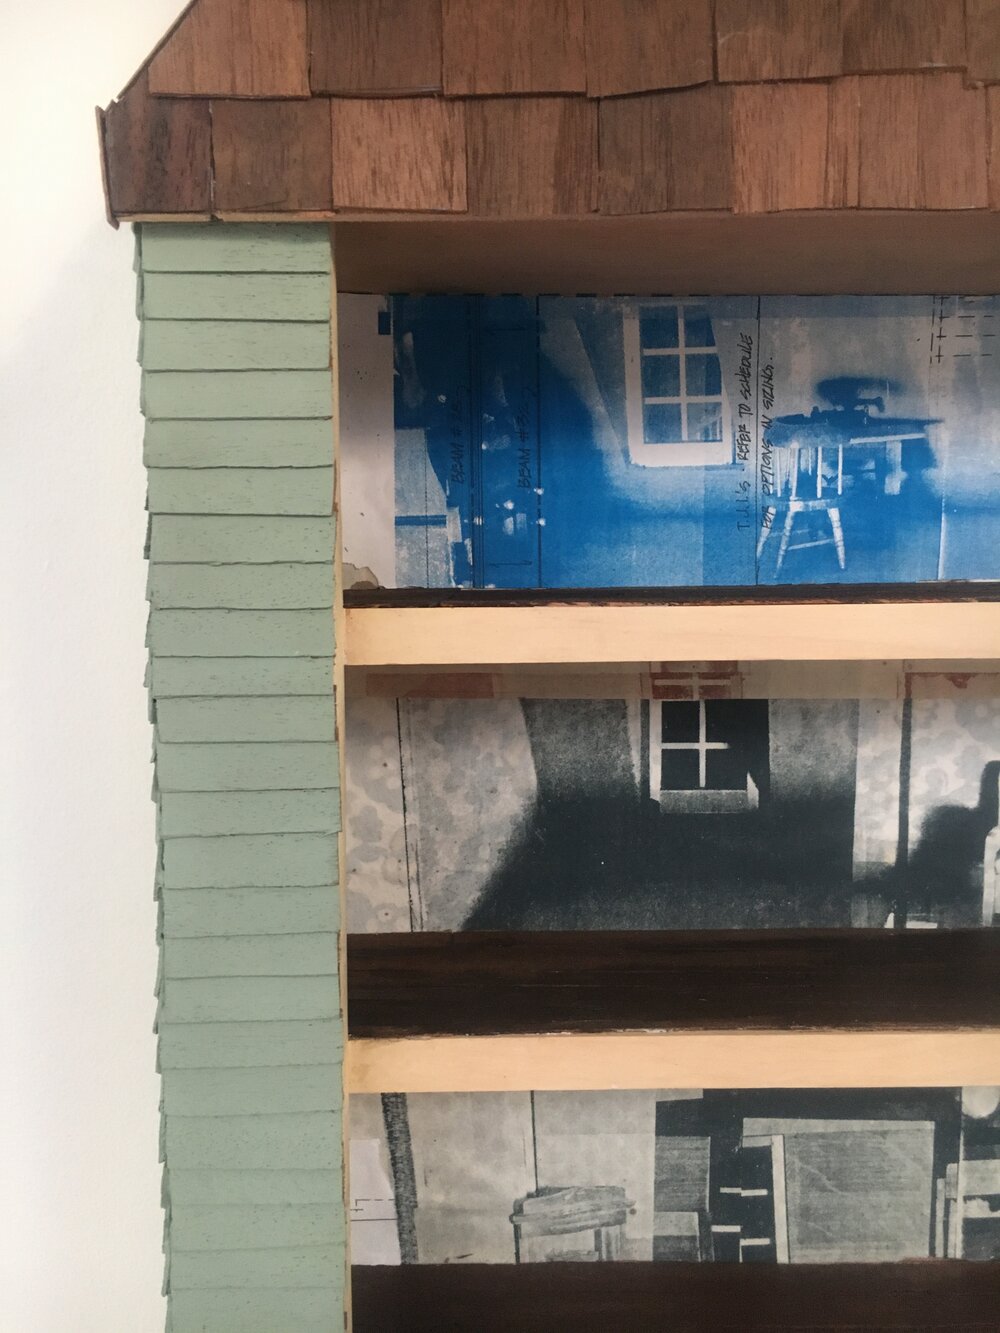   Treehouse, ( Detail), 2018, Wood, serigraphy, found materials, house paint, dimensions variable 